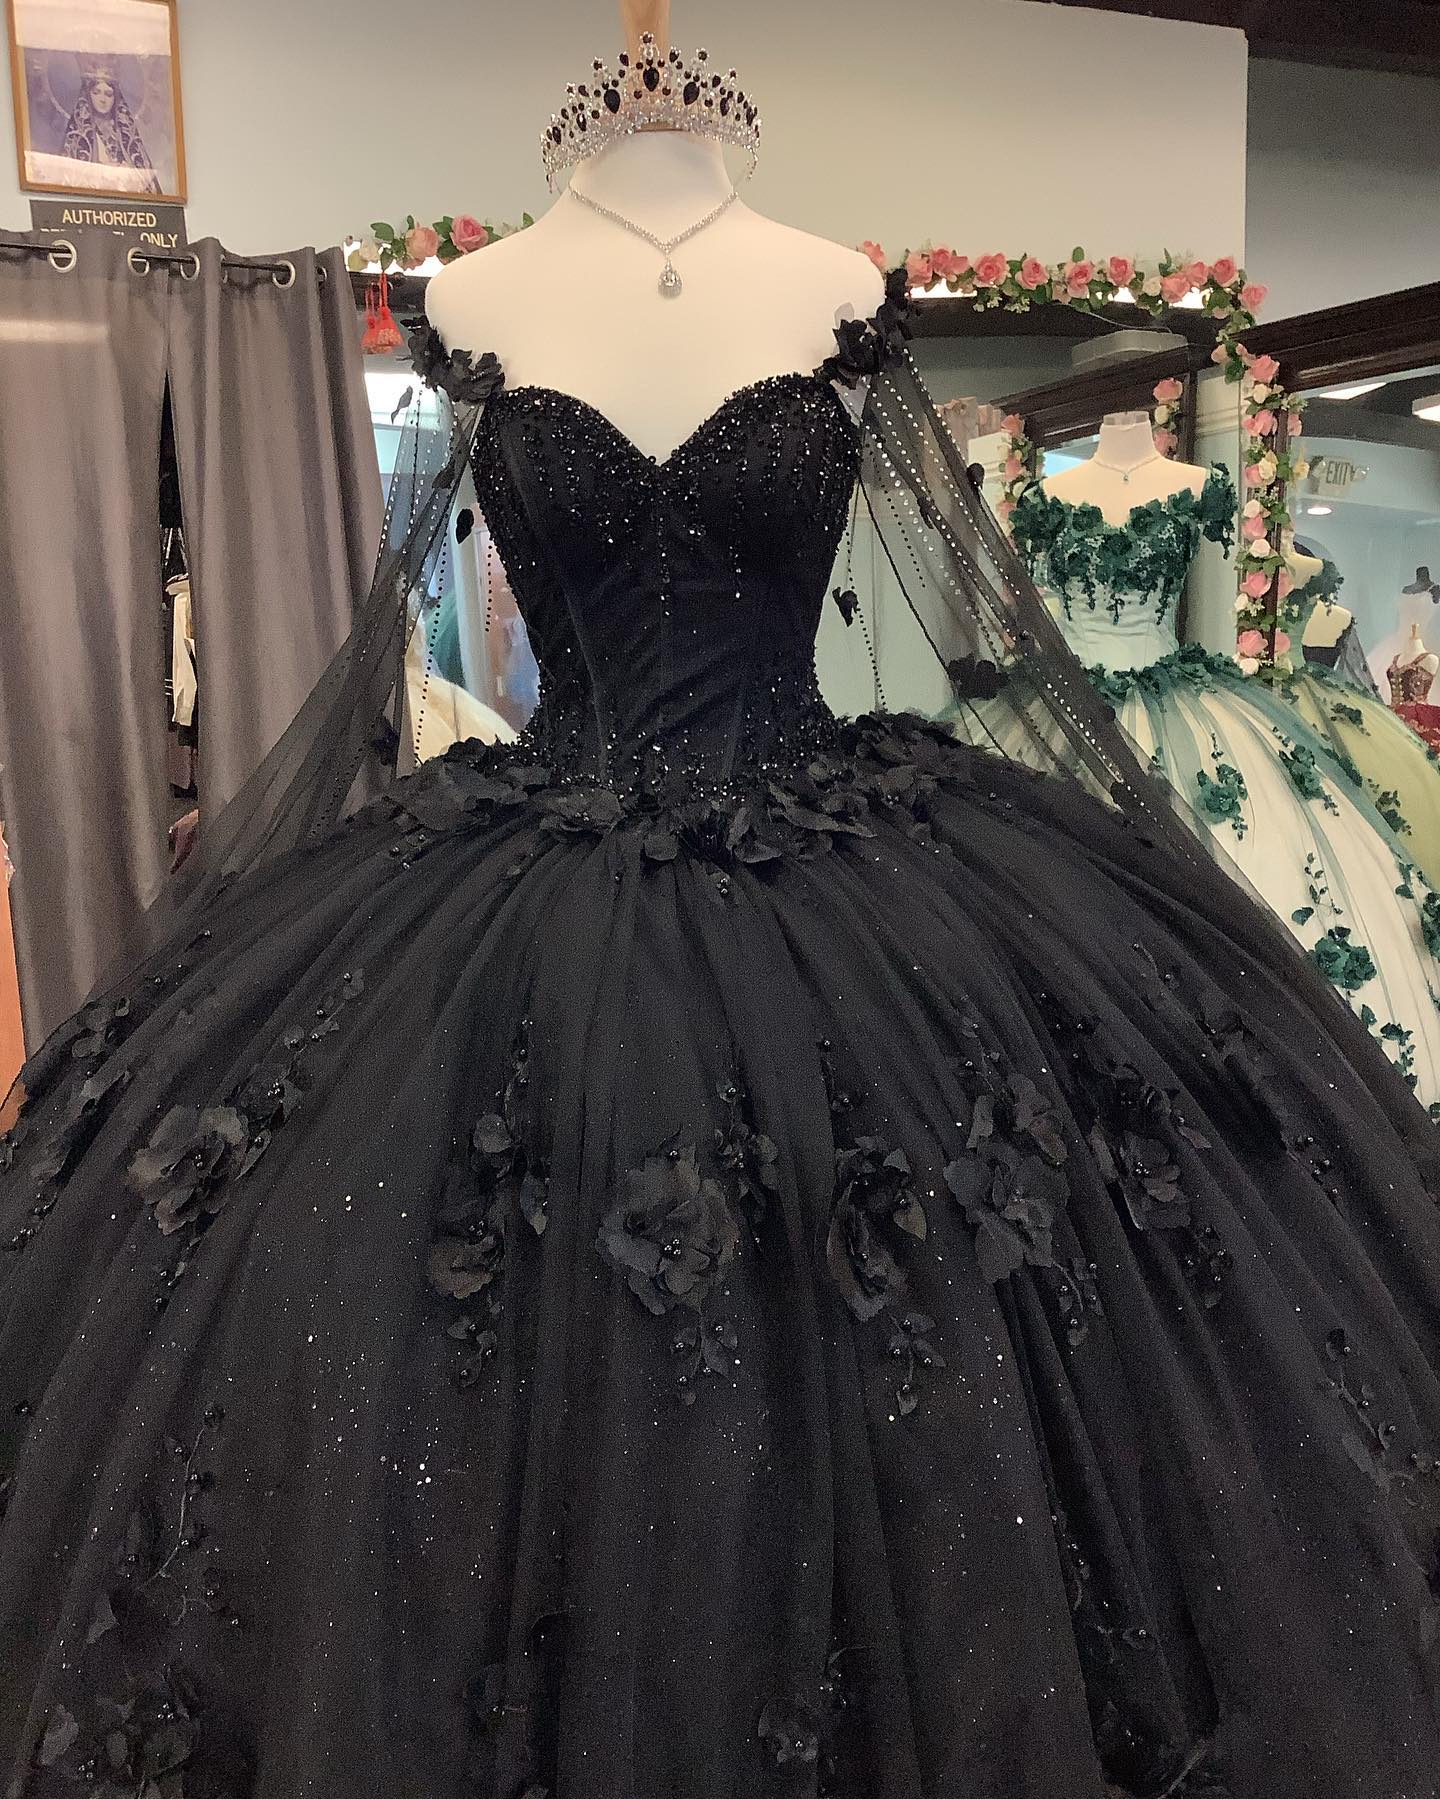 Long Sleeves Lace Applique Beads Evening Night Dresses 2021 O-neck Black  Satin A-line Formal Prom Wedding Party Gowns - Evening Dresses - AliExpress